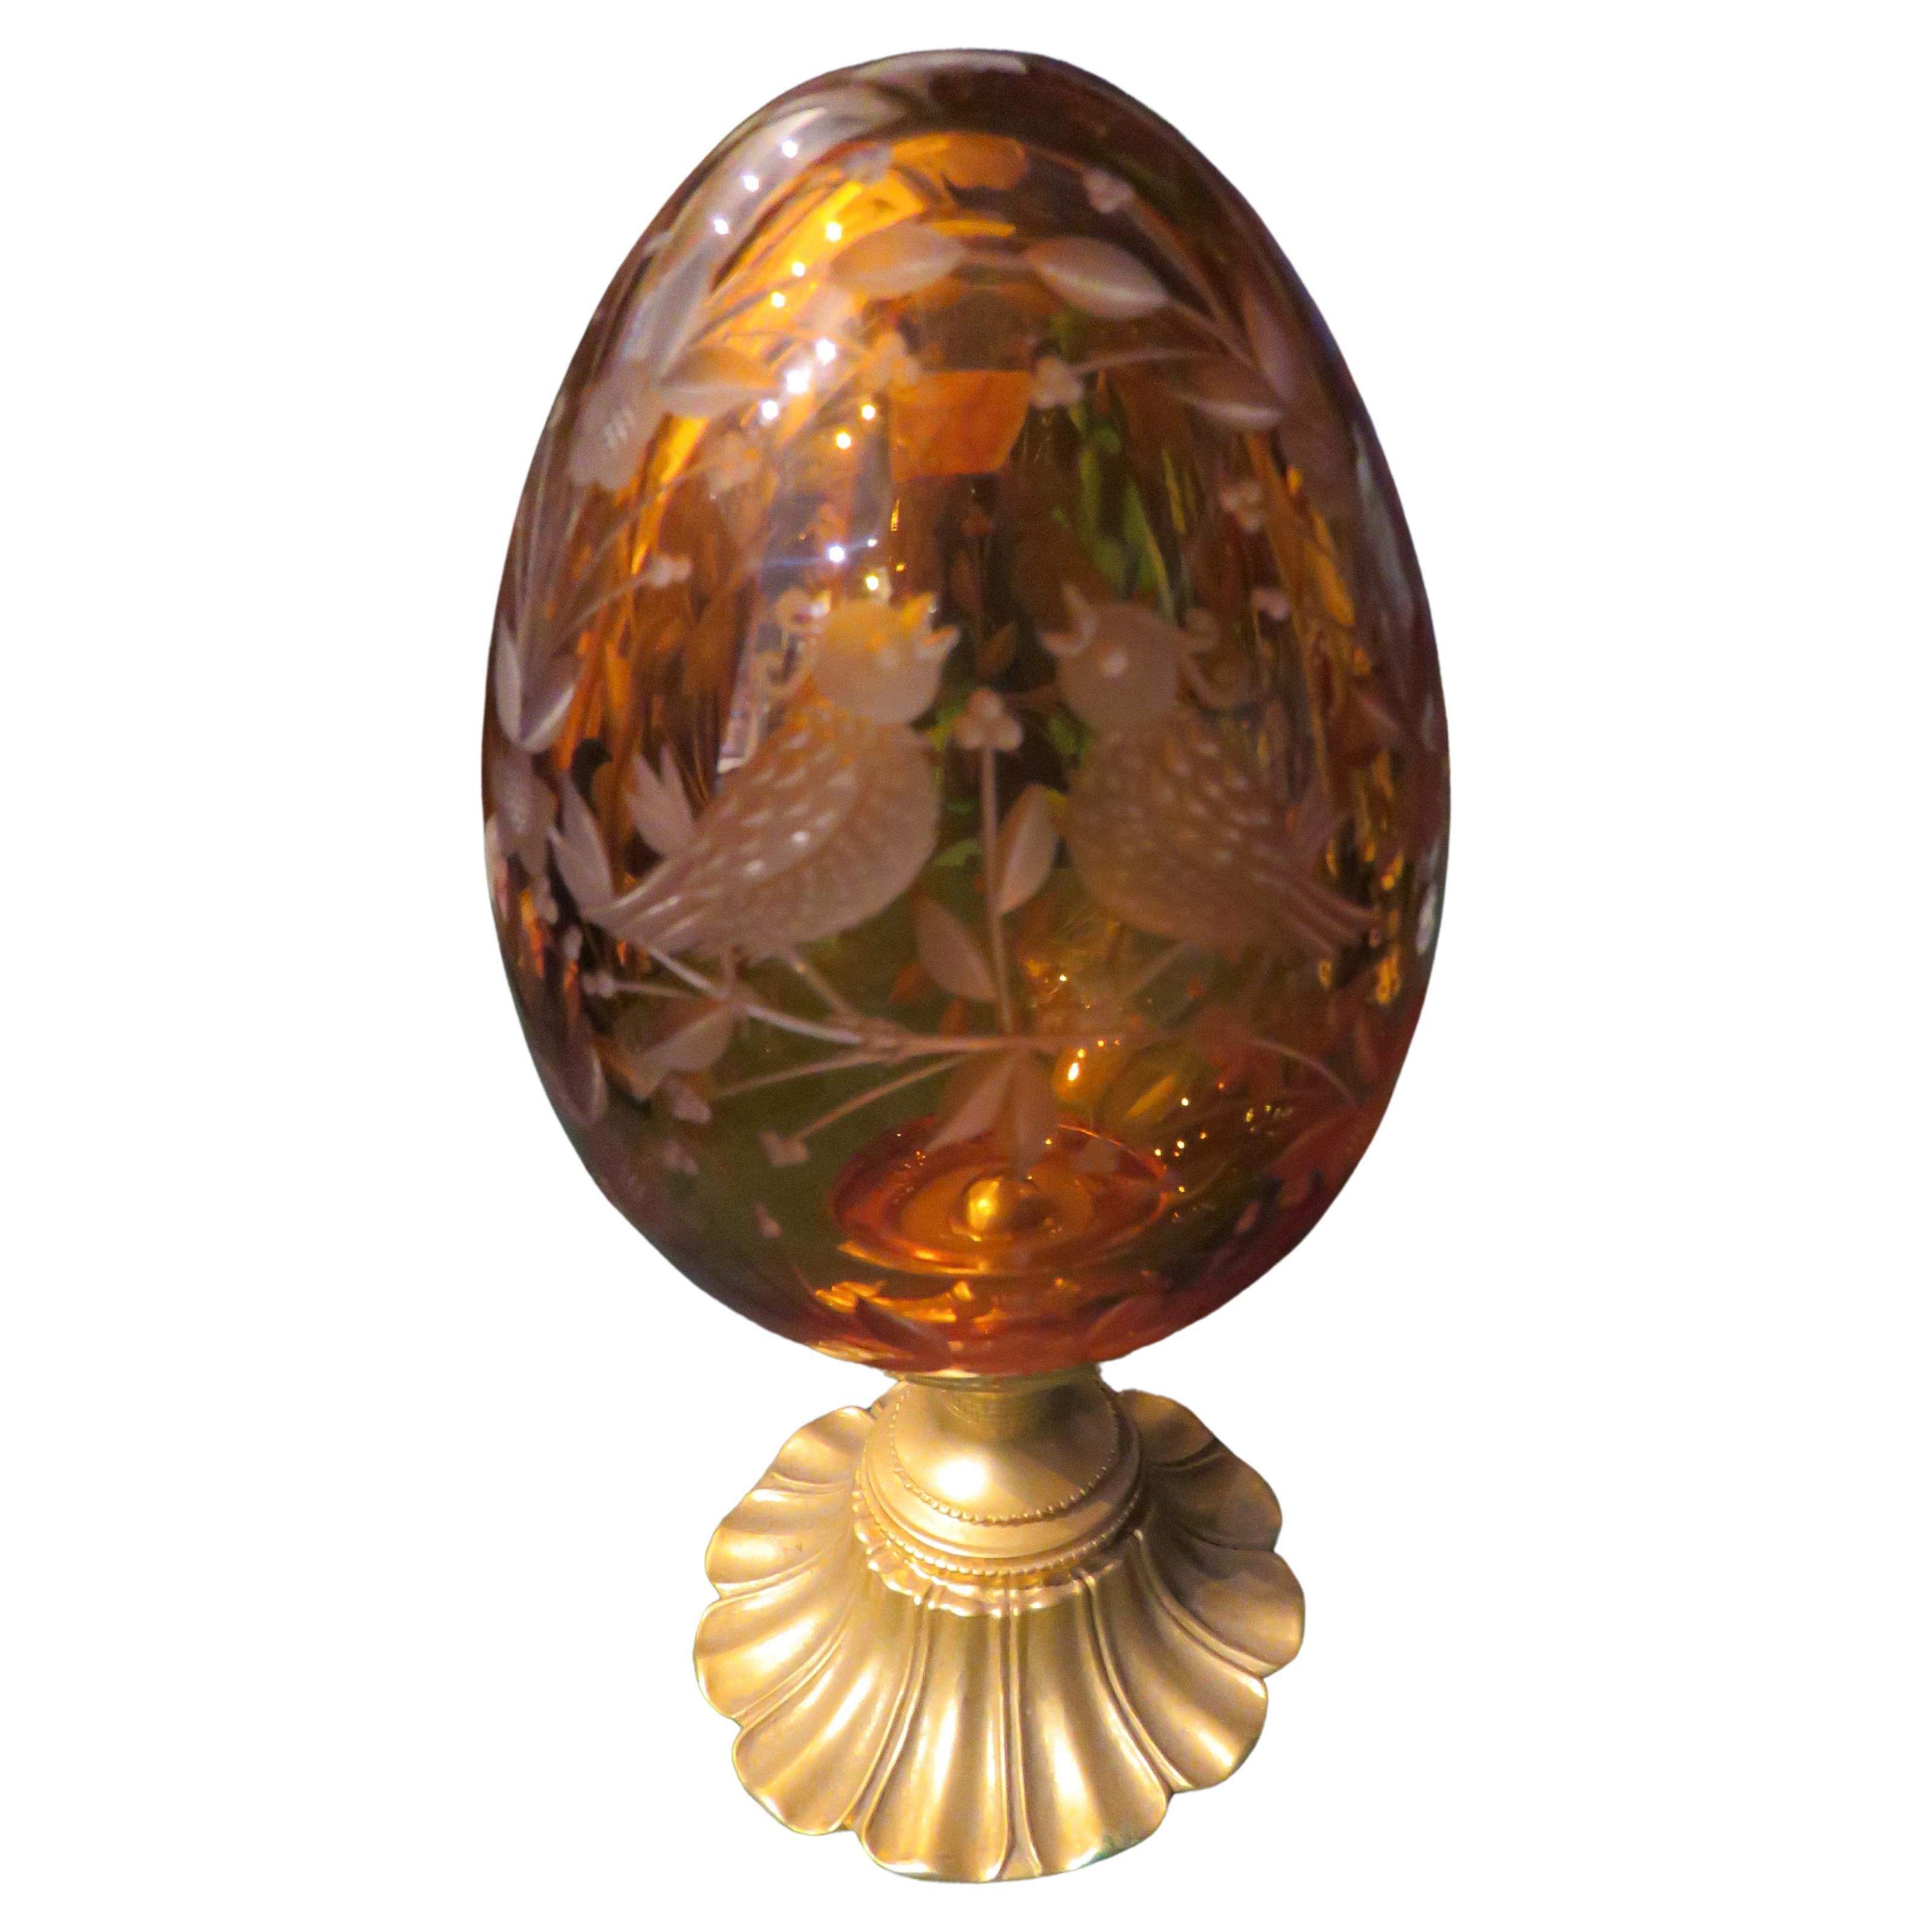  Rare Gorgeous Fancy Hand Cut Faberge Style Crystal 24KT Gold Leaf Egg For Sale